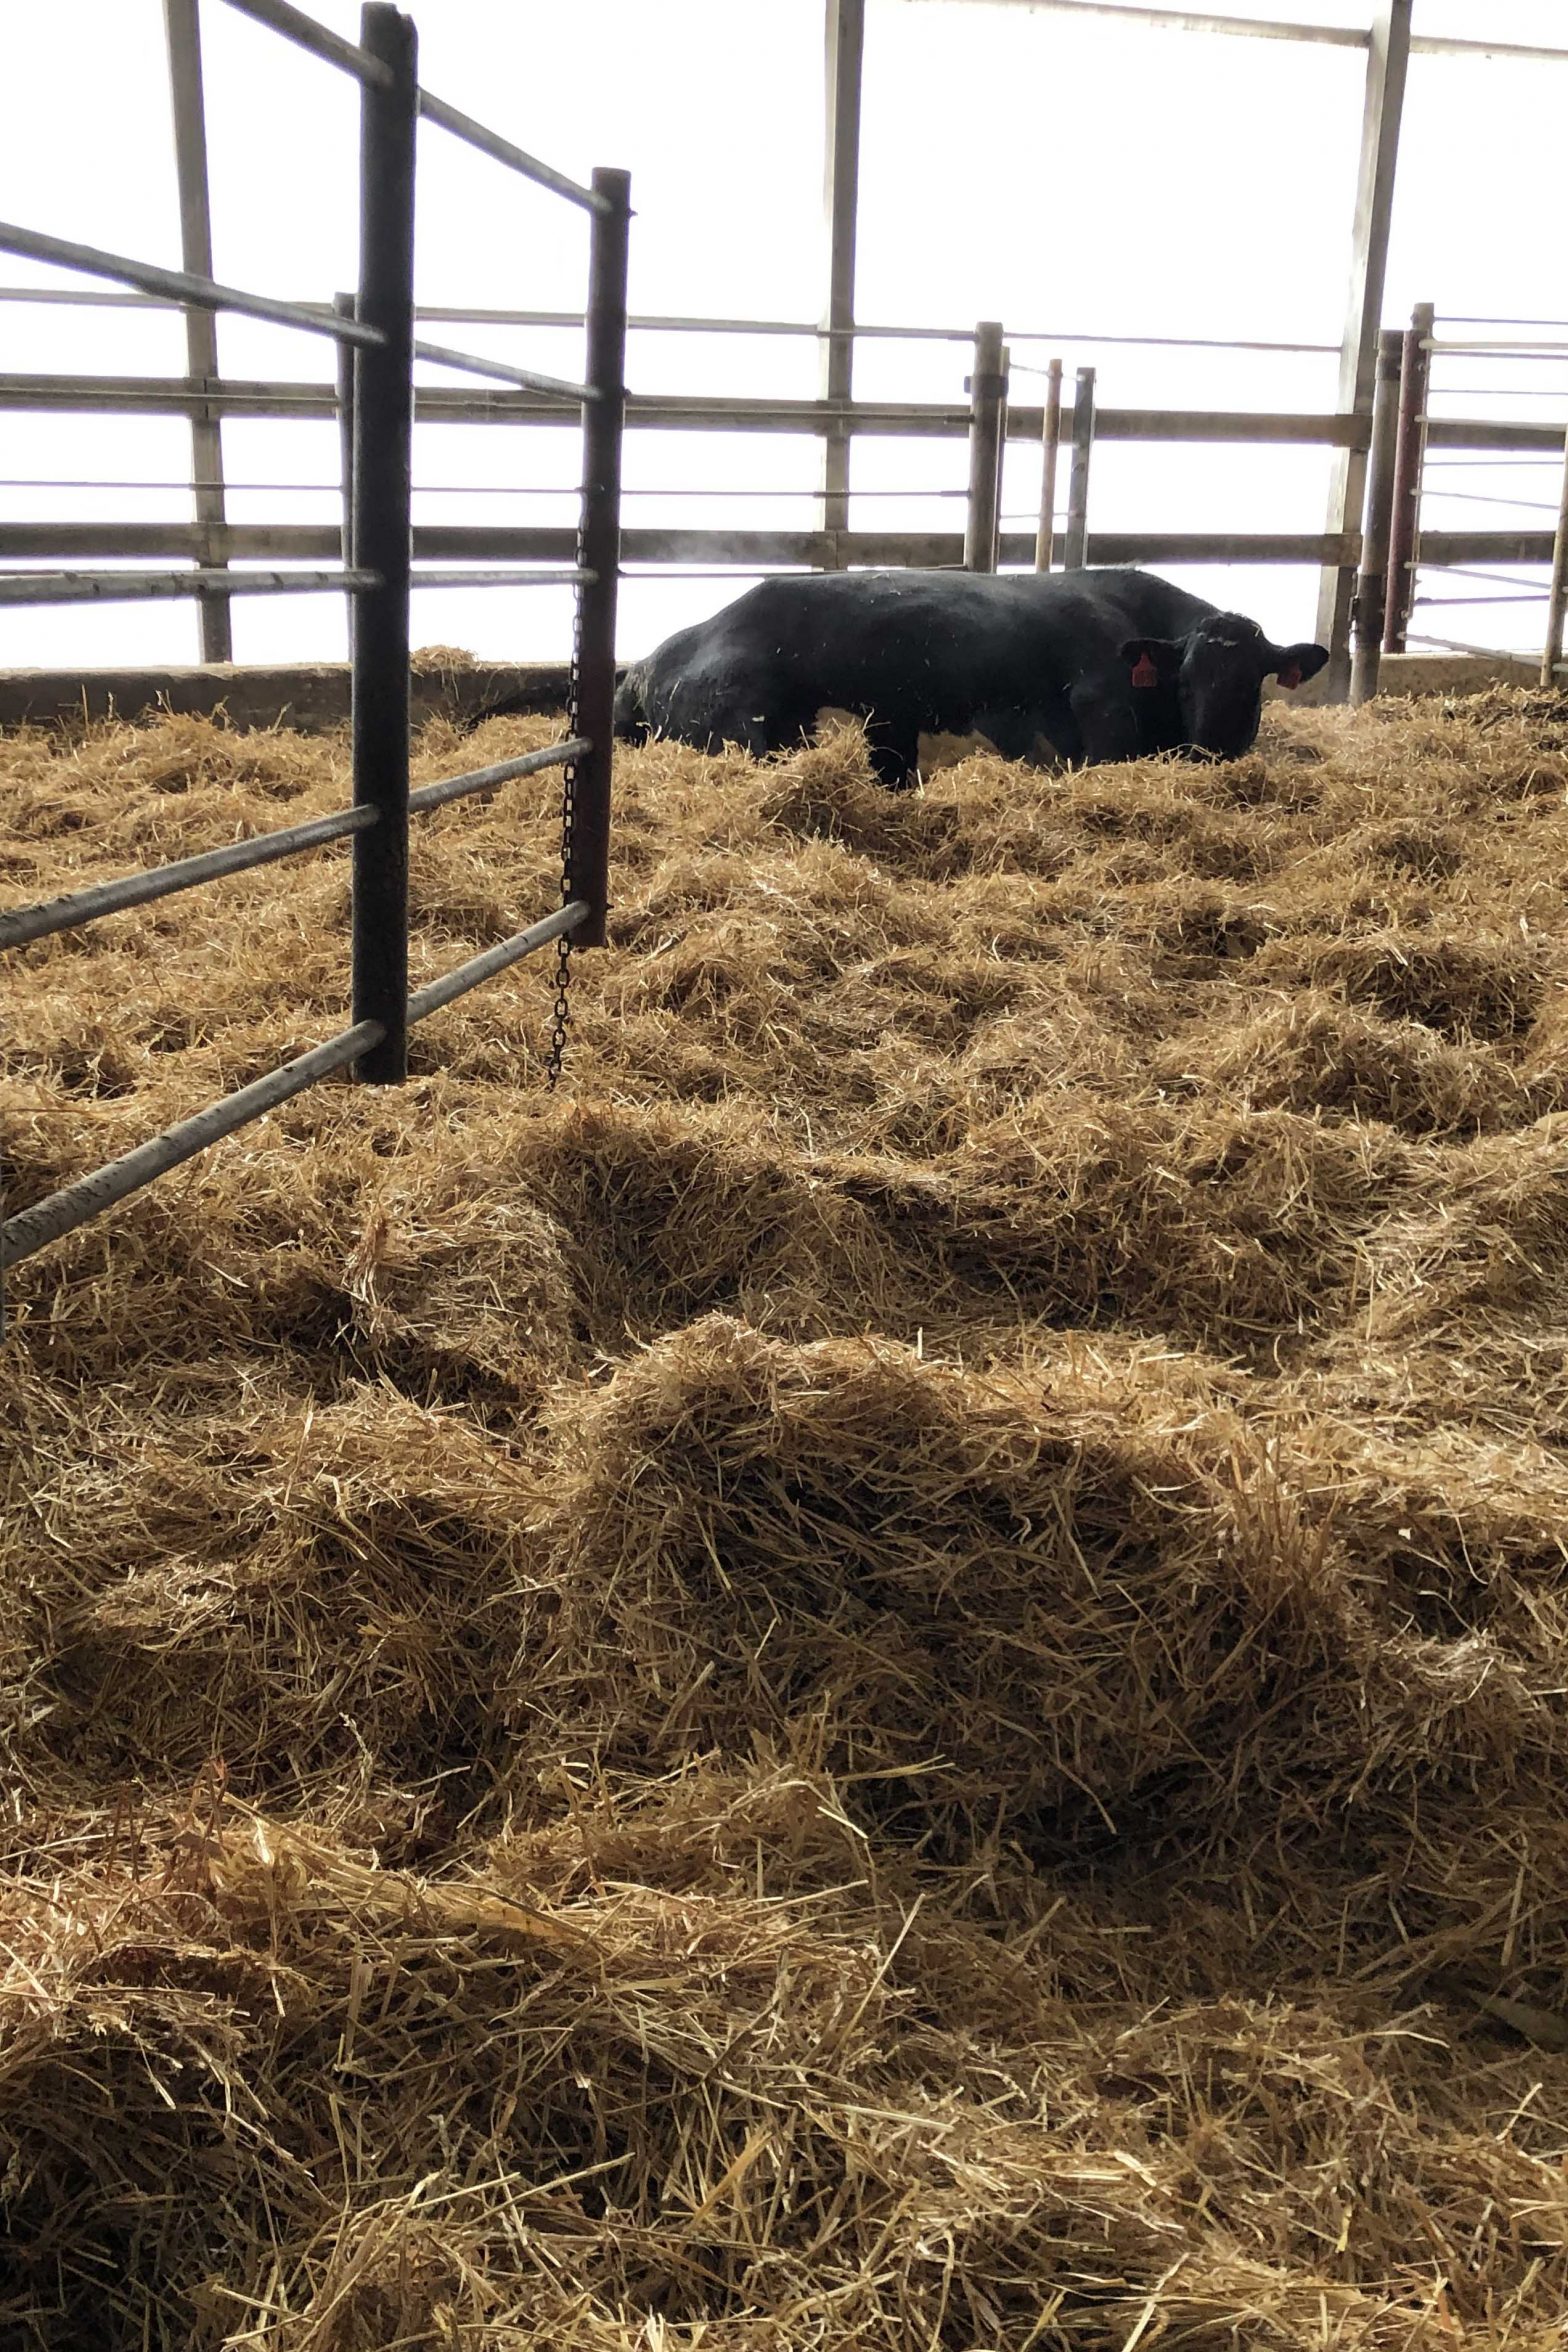 Excellent calf care begins in the maternity pen at Gar-Lin Dairy LLC in Eyota, Minnesota.  According to Dana Allen-Tully, a farm partner and the dairy operations manager, the team goes to great lengths to keep maternity pens and bedding as clean as possible.